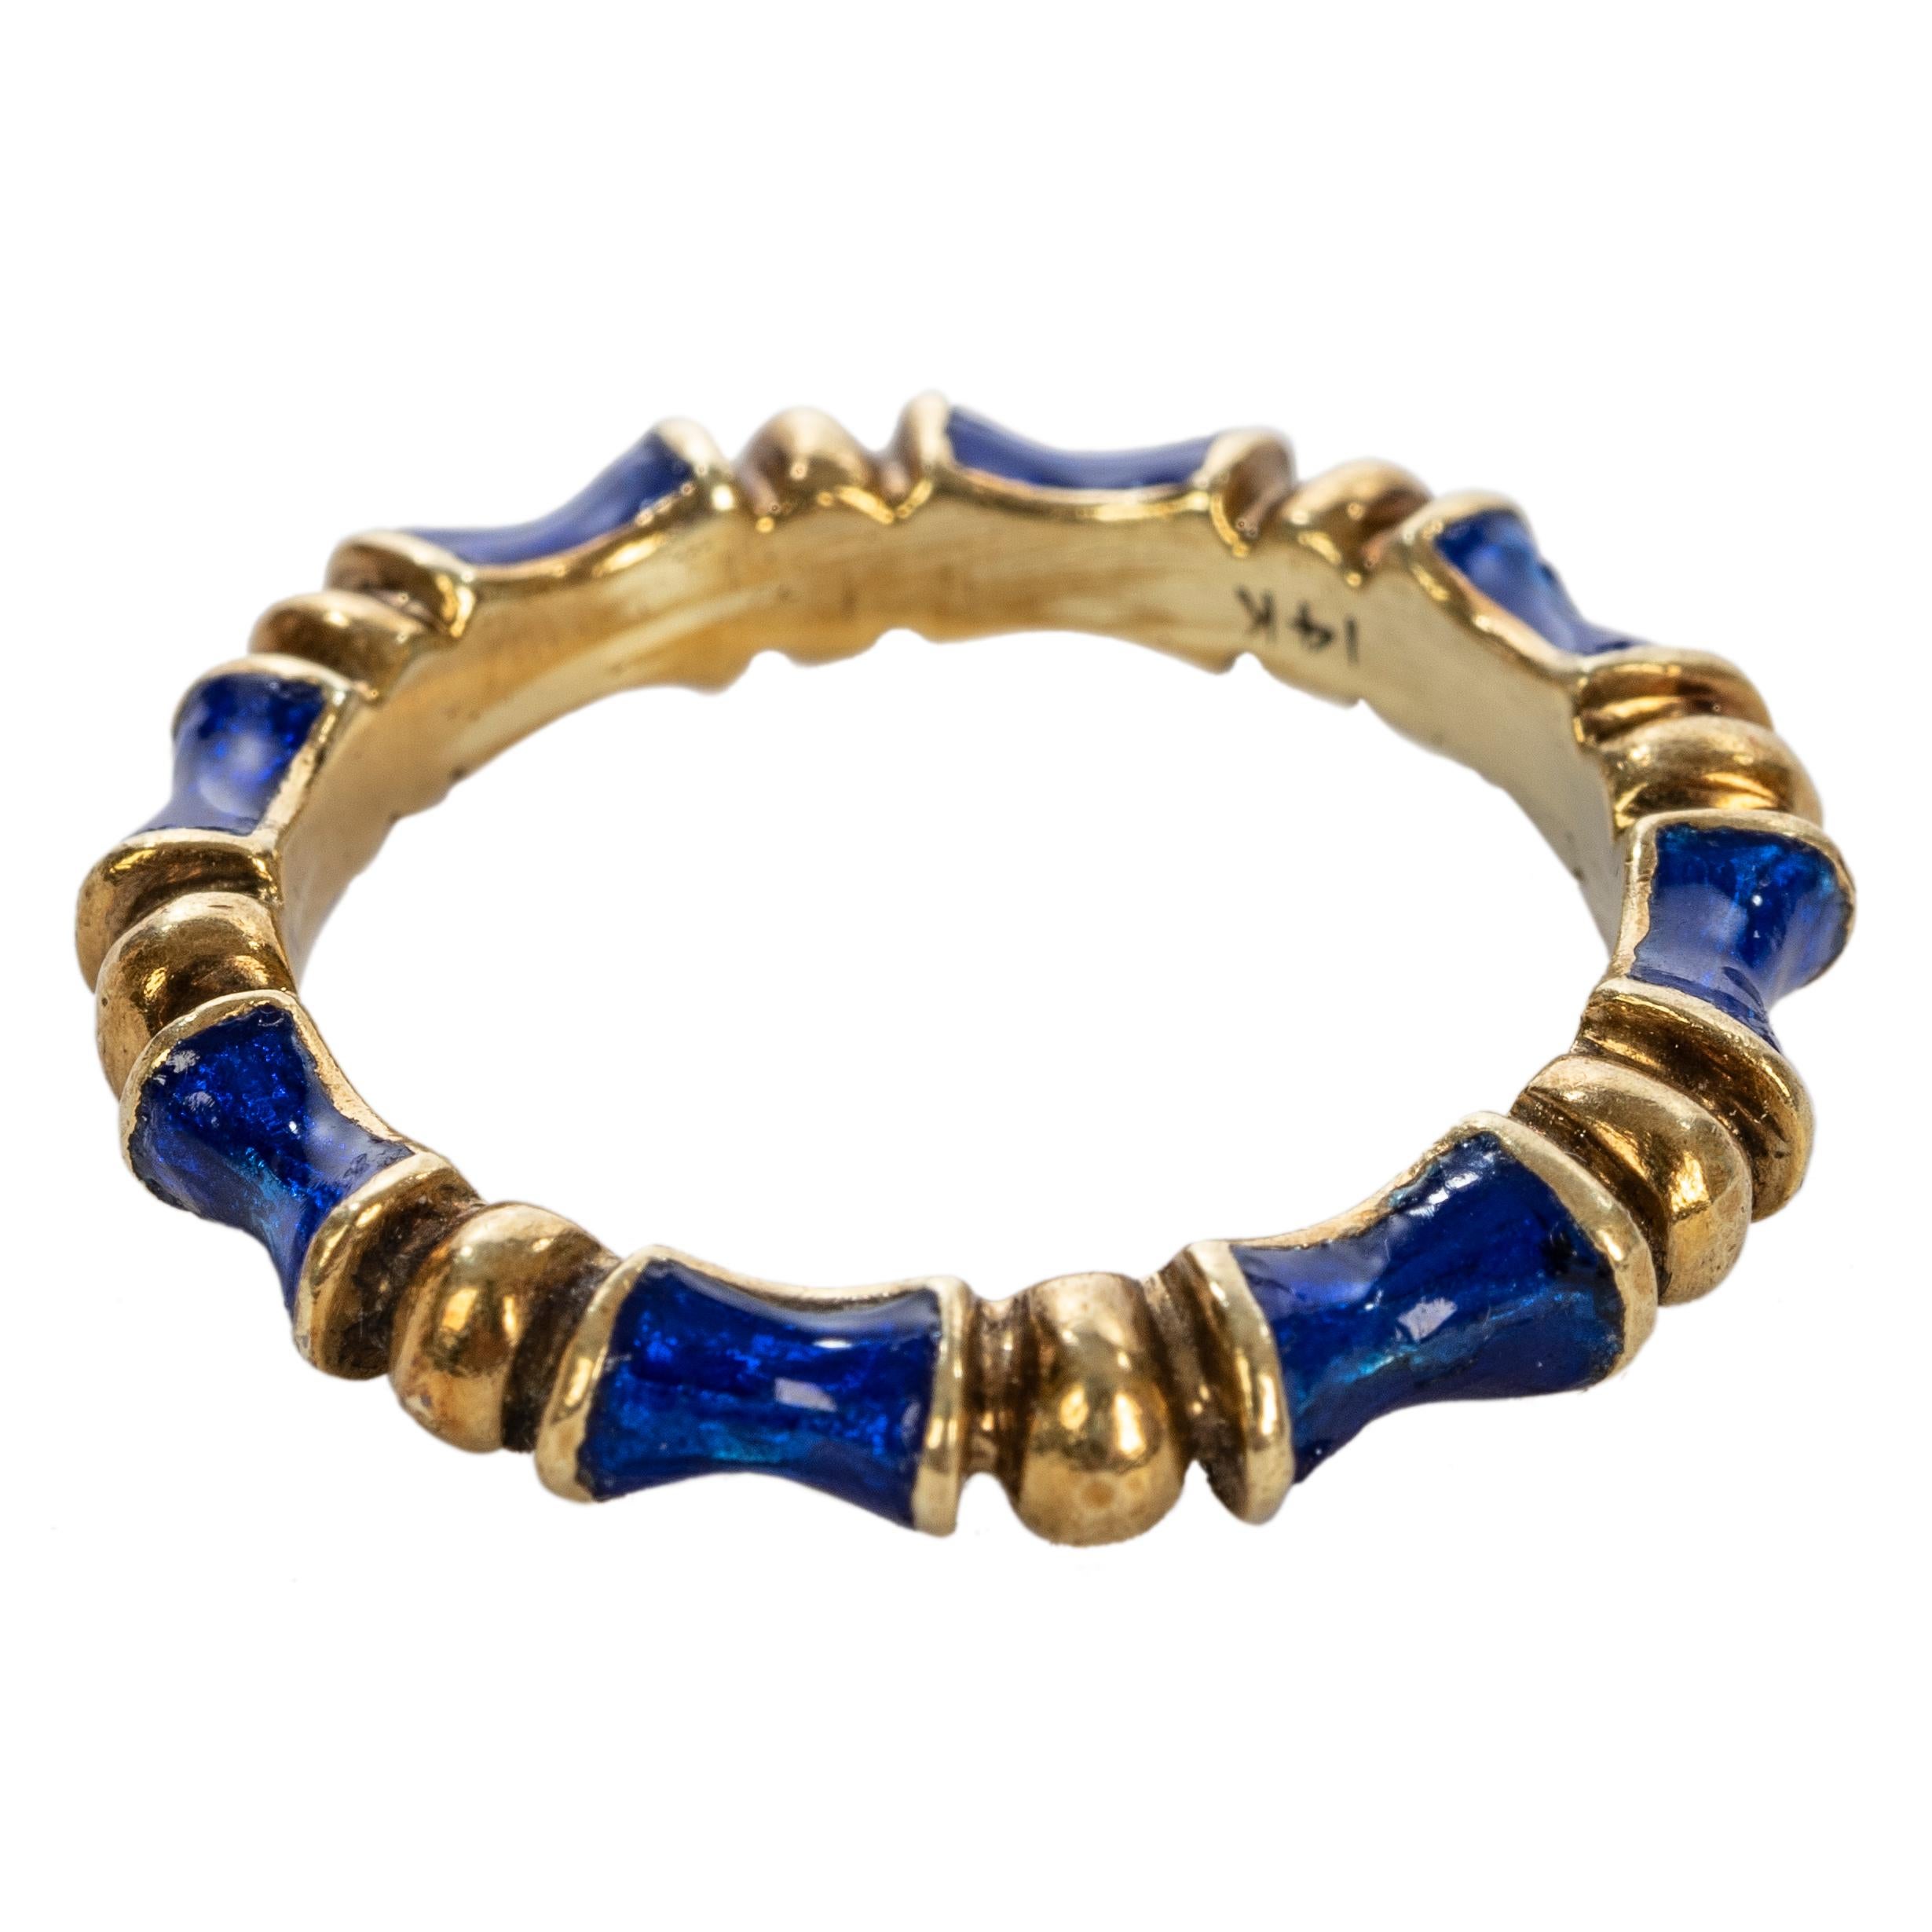 This wonderful 14k yellow gold band is of sculpted bamboo design with alternating sections of translucent cobalt blue enamel.

Mid 20th century.

Size 7.